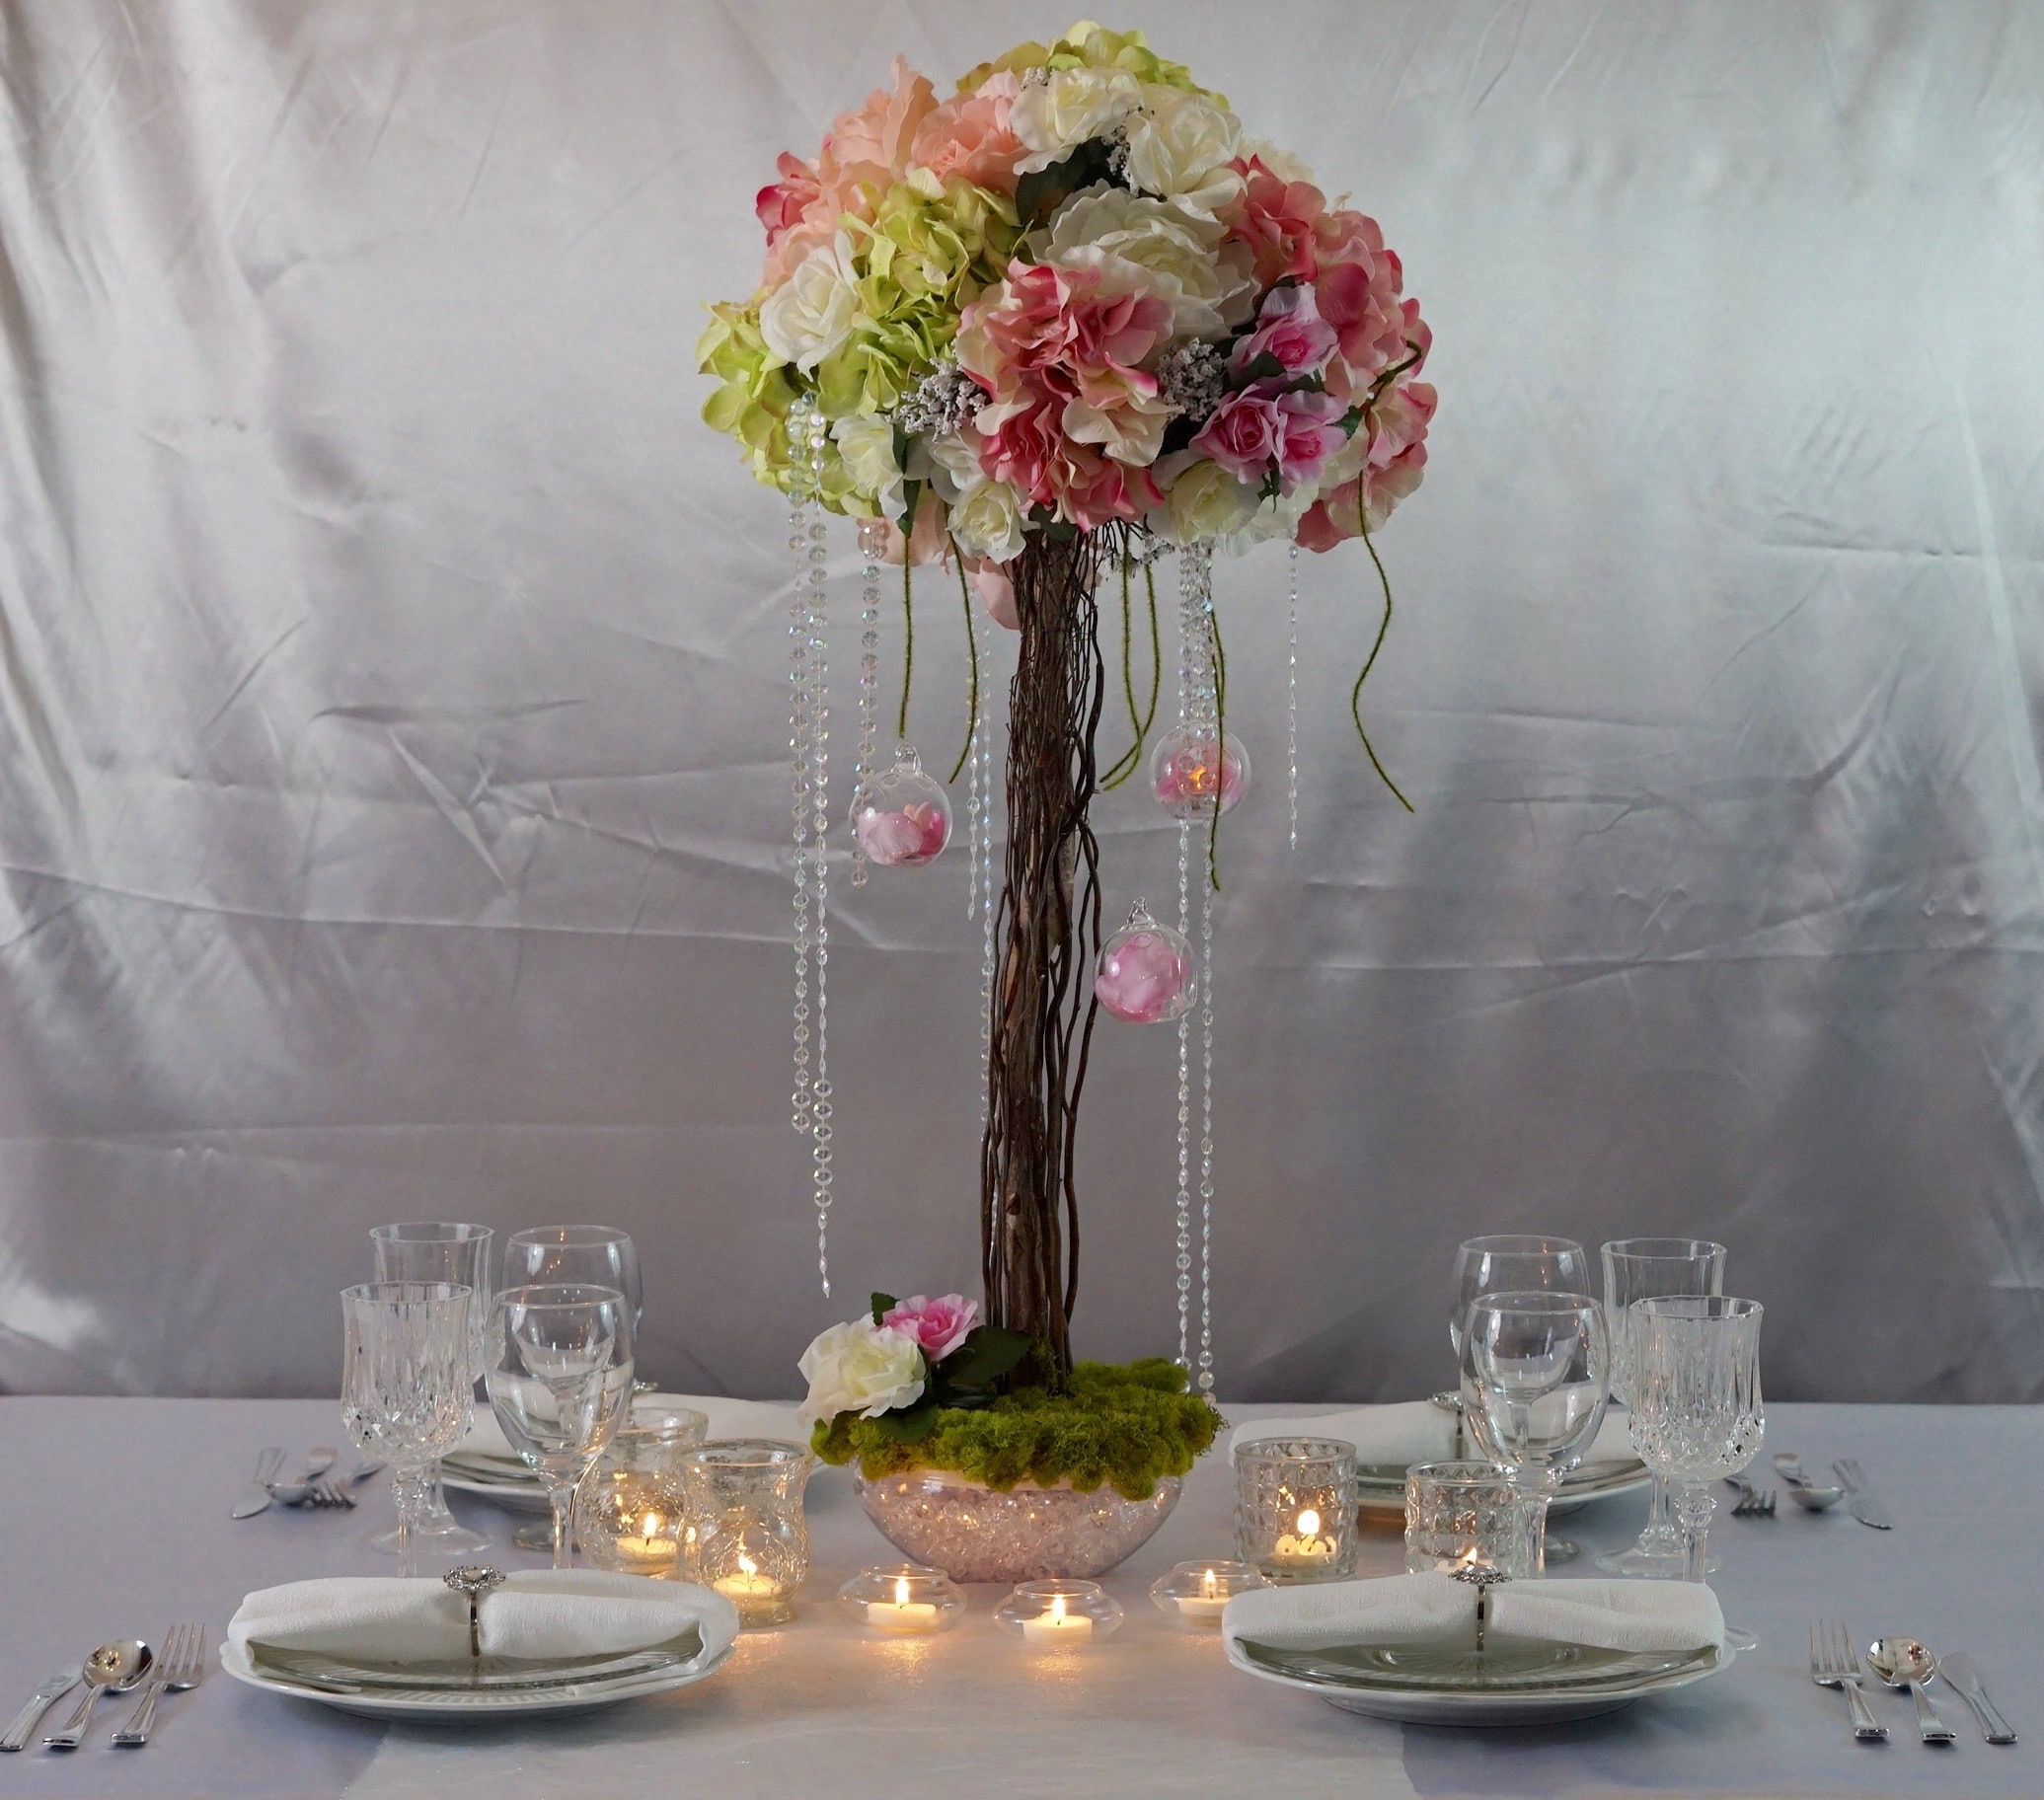 DIY Wedding Centerpieces With Branches
 Simply Beautiful Willow and Birch Branch Wedding Centerpiece